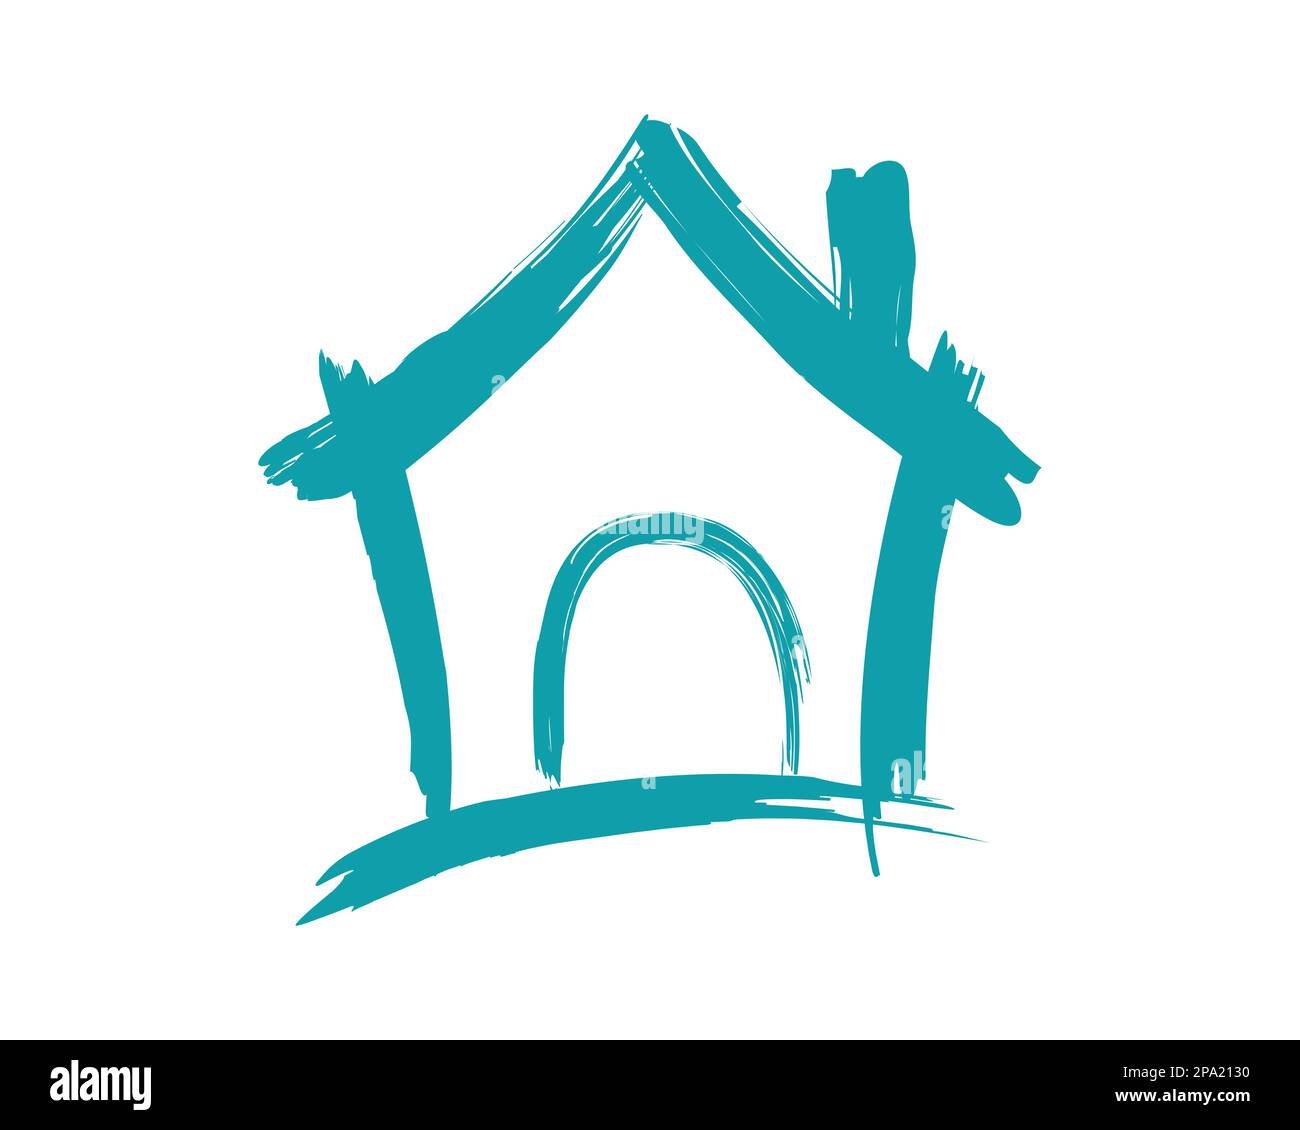 Simple House Illustration visualized with Brush Strokes and Simple Illustration Stock Vector